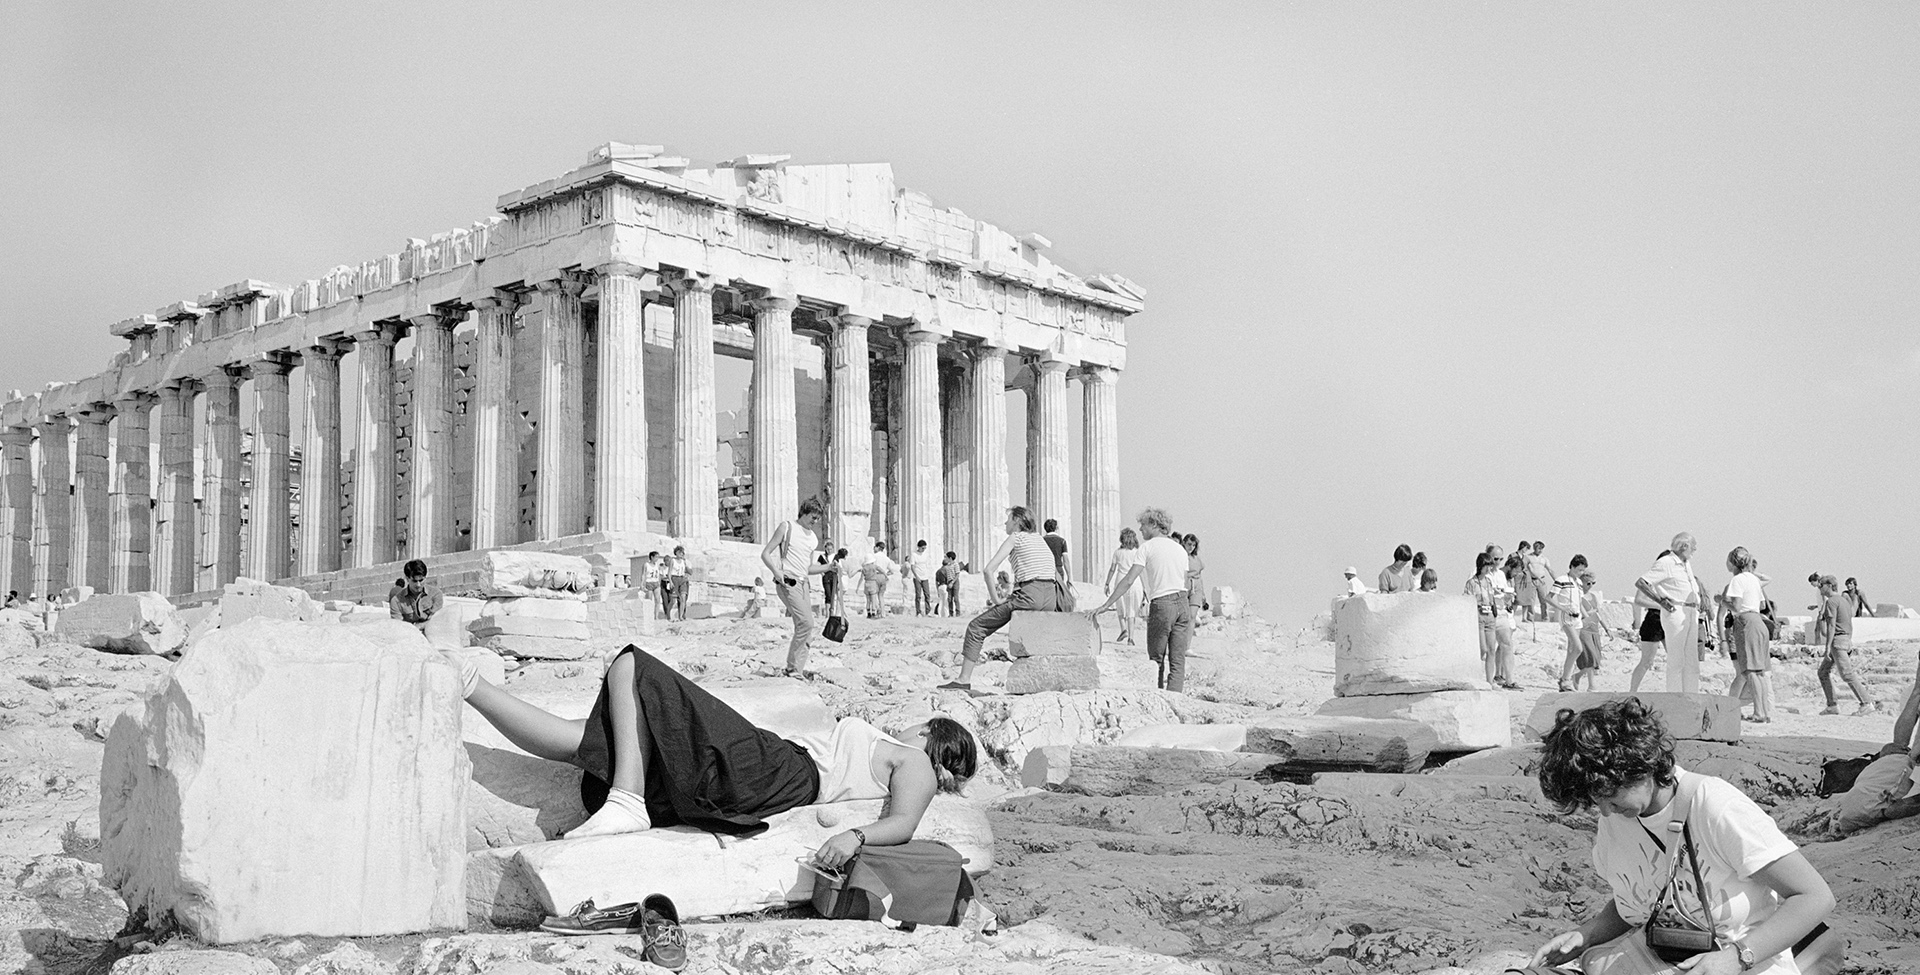 Tod Papageorge: Hooked on Acropolis